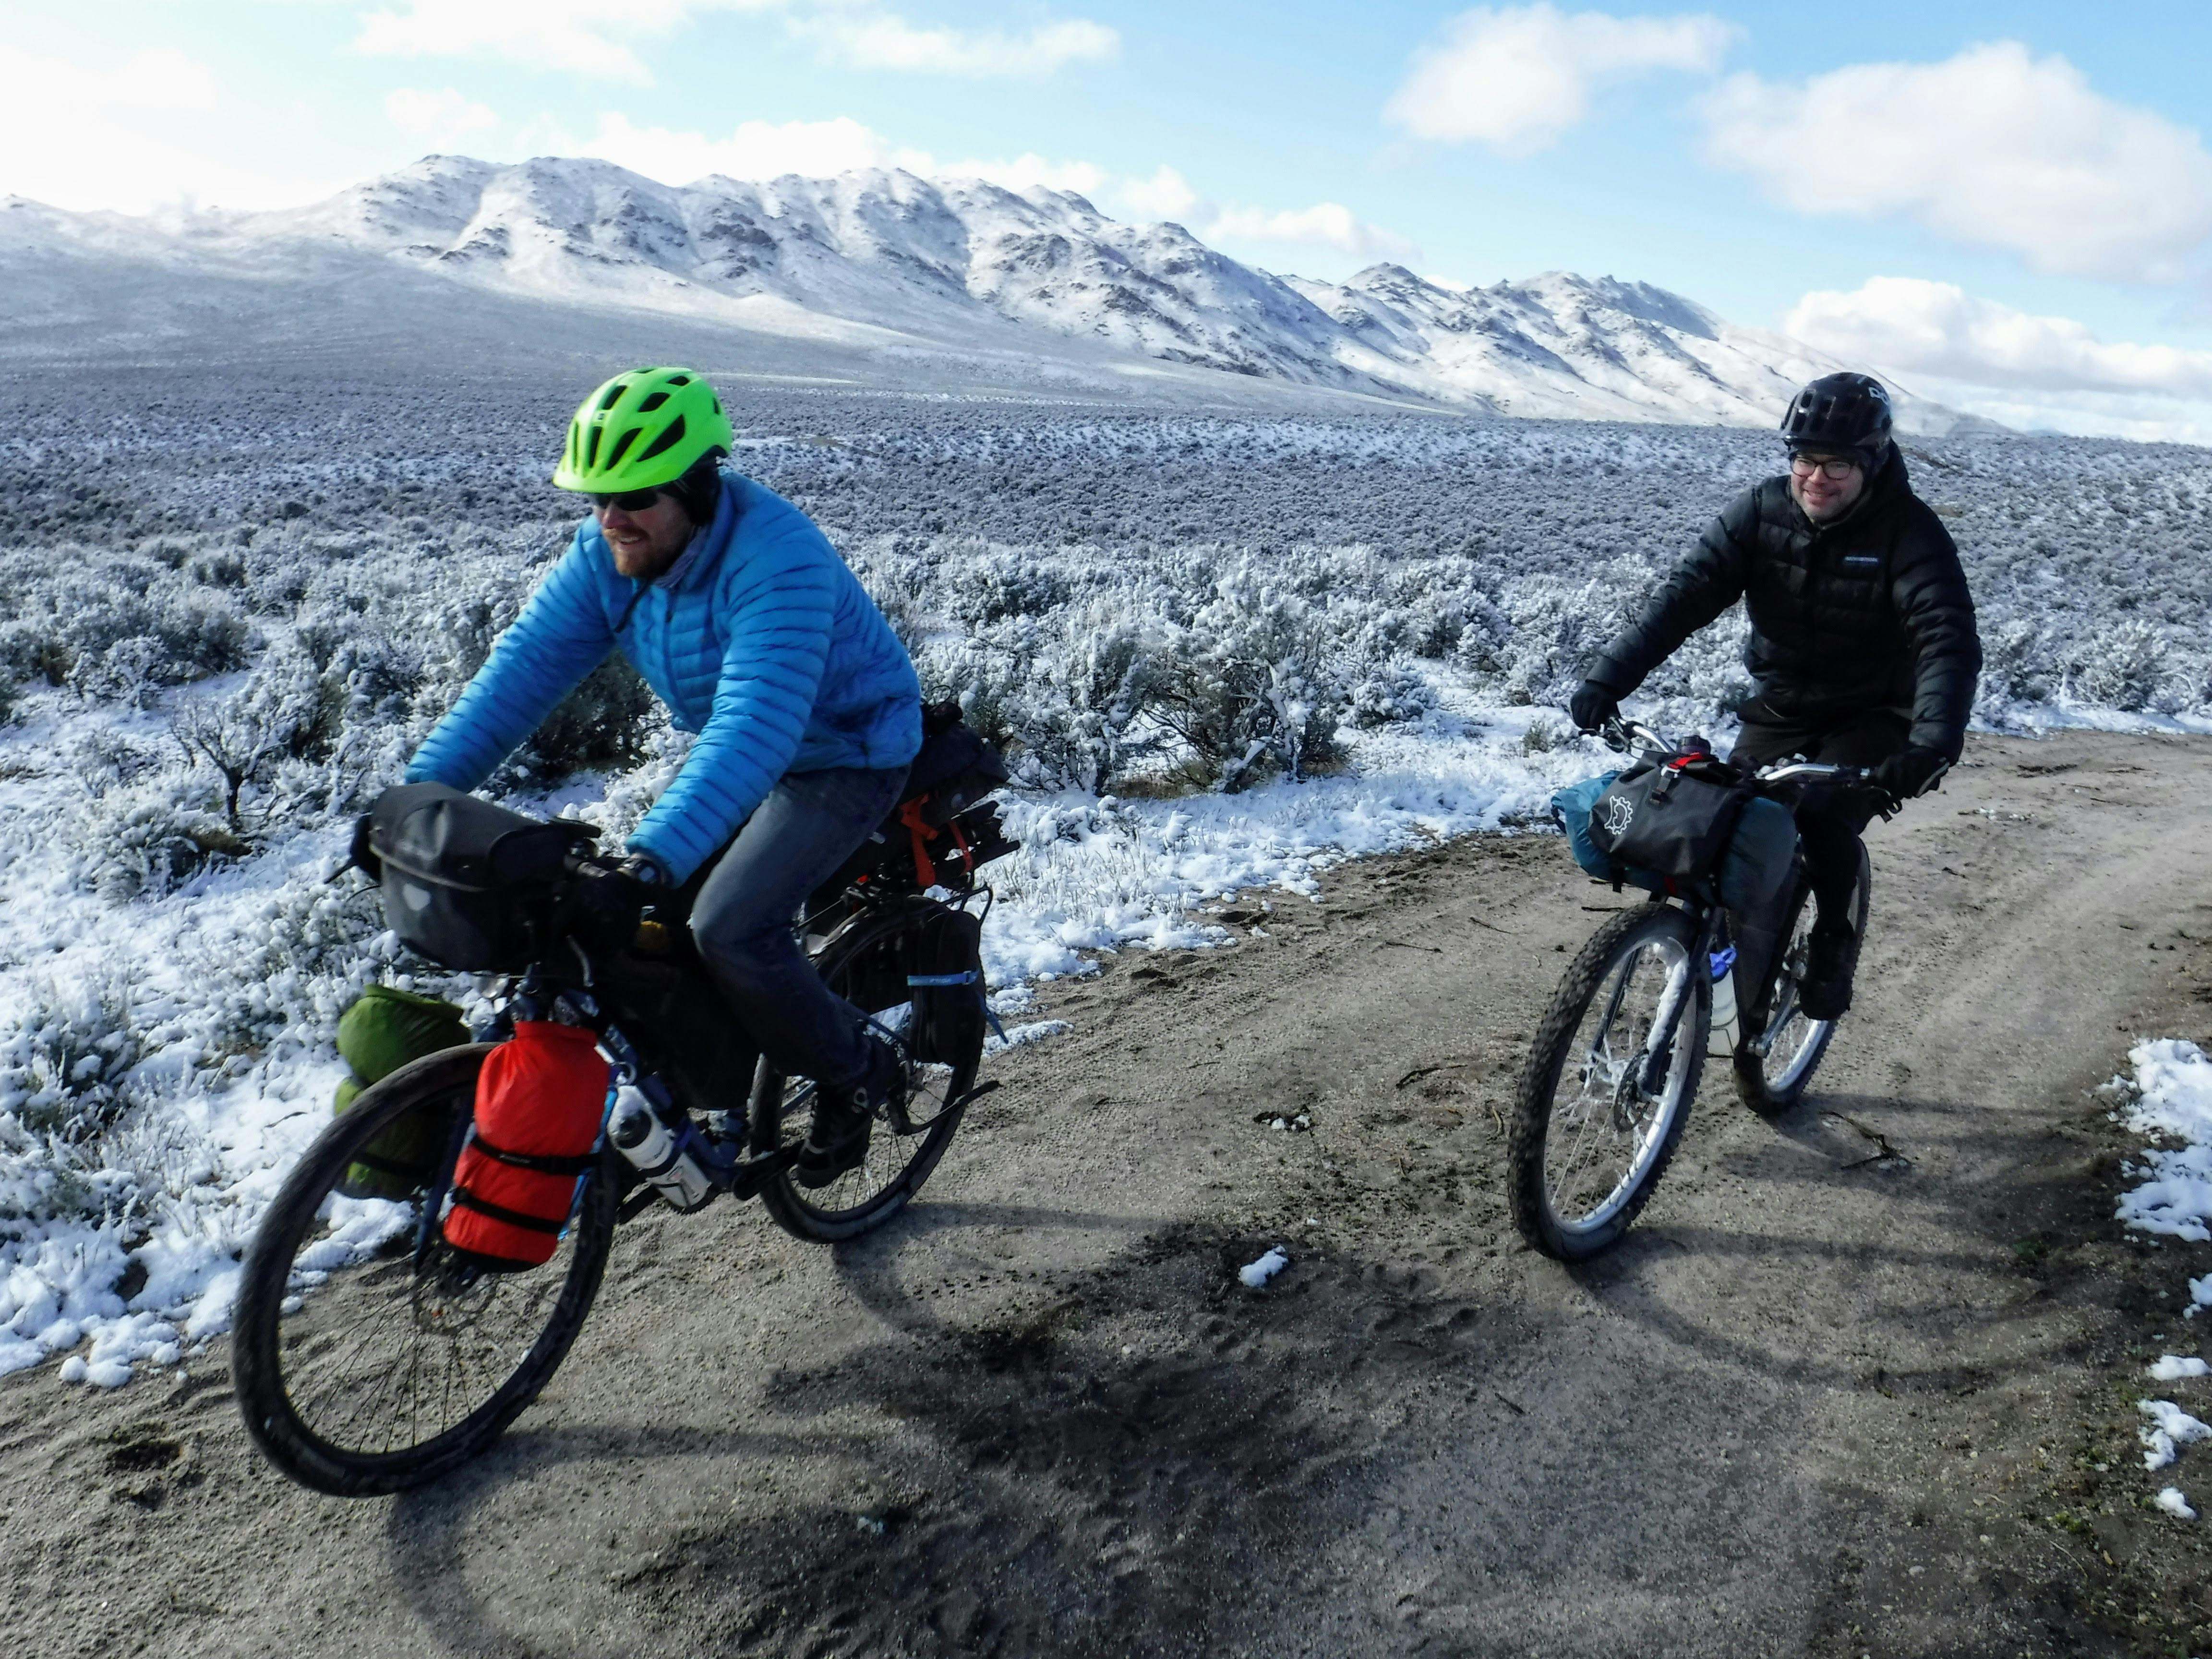 Two bikepackers wear their puffy jackers as they ride along a trail. There is snow on the ground on the sides of the trail.